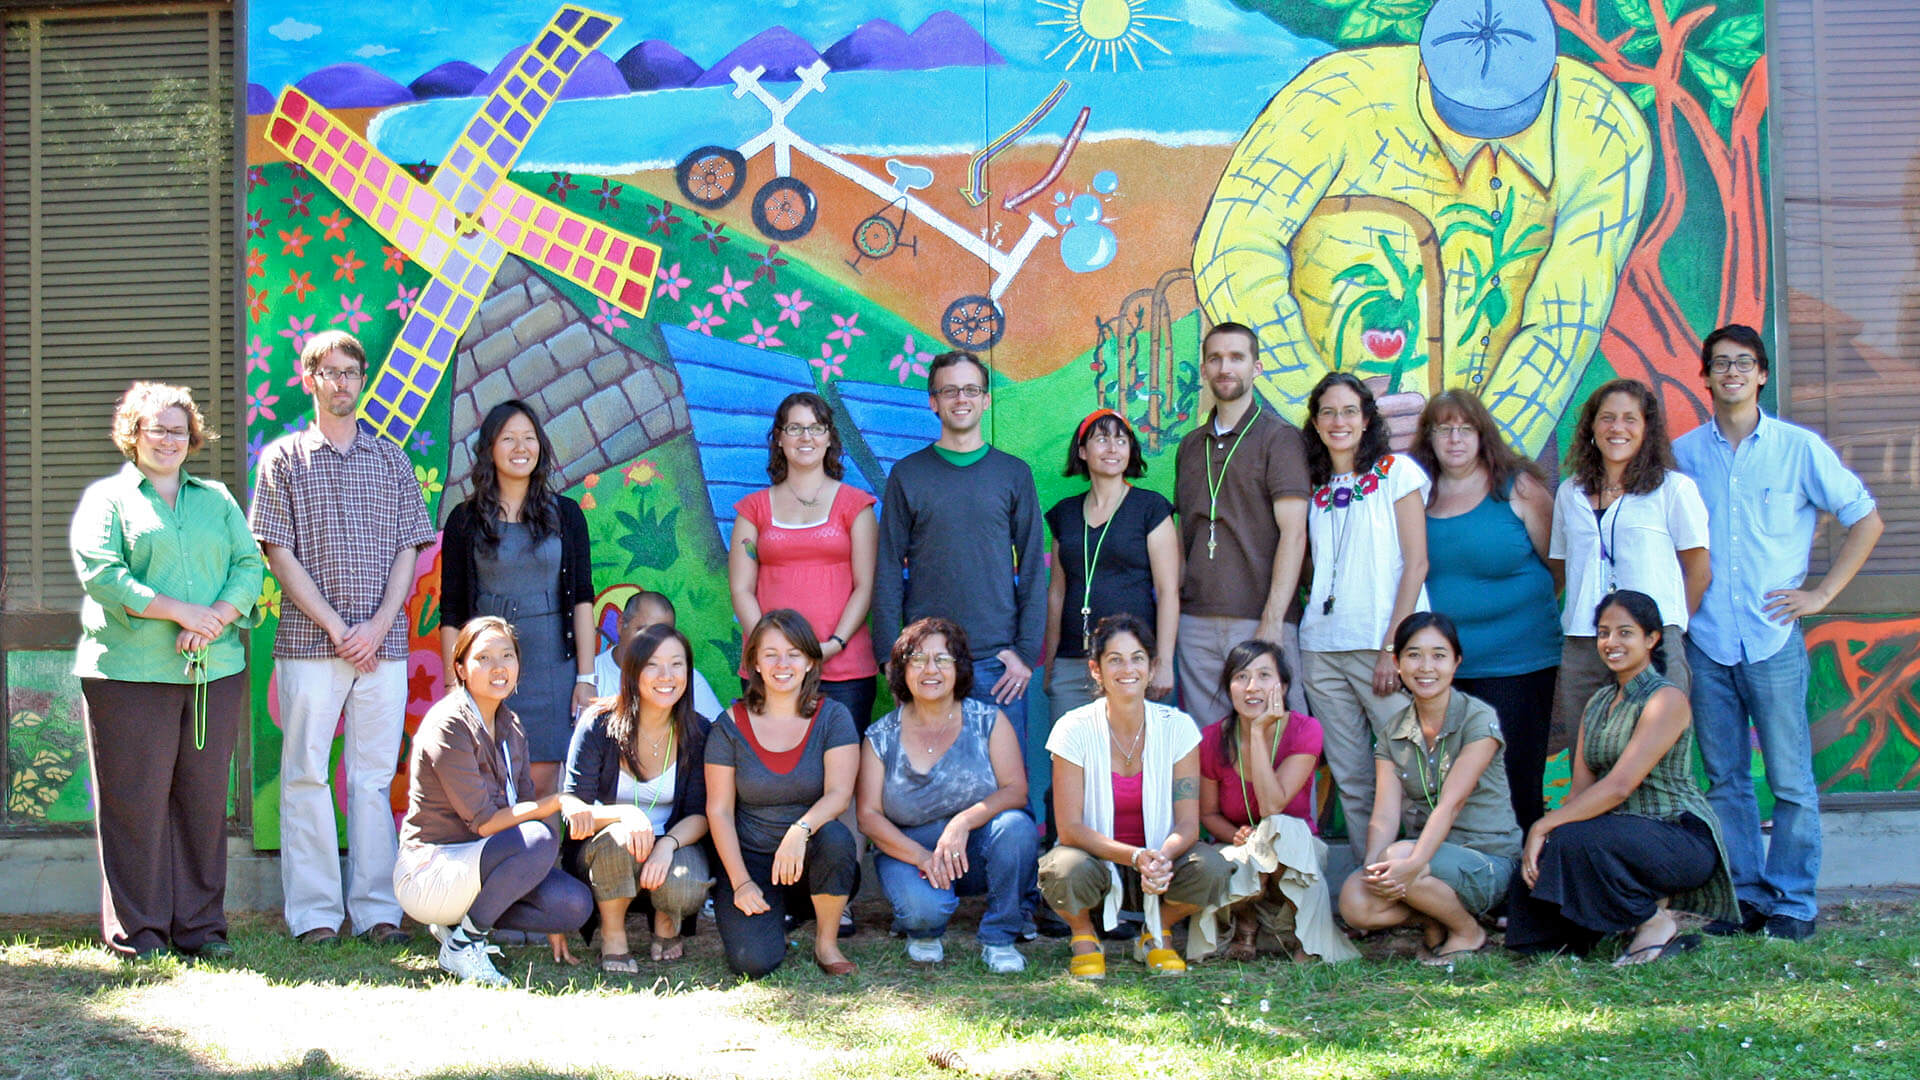  A group of smiling teachers pose for a photo in front of a colorful mural.